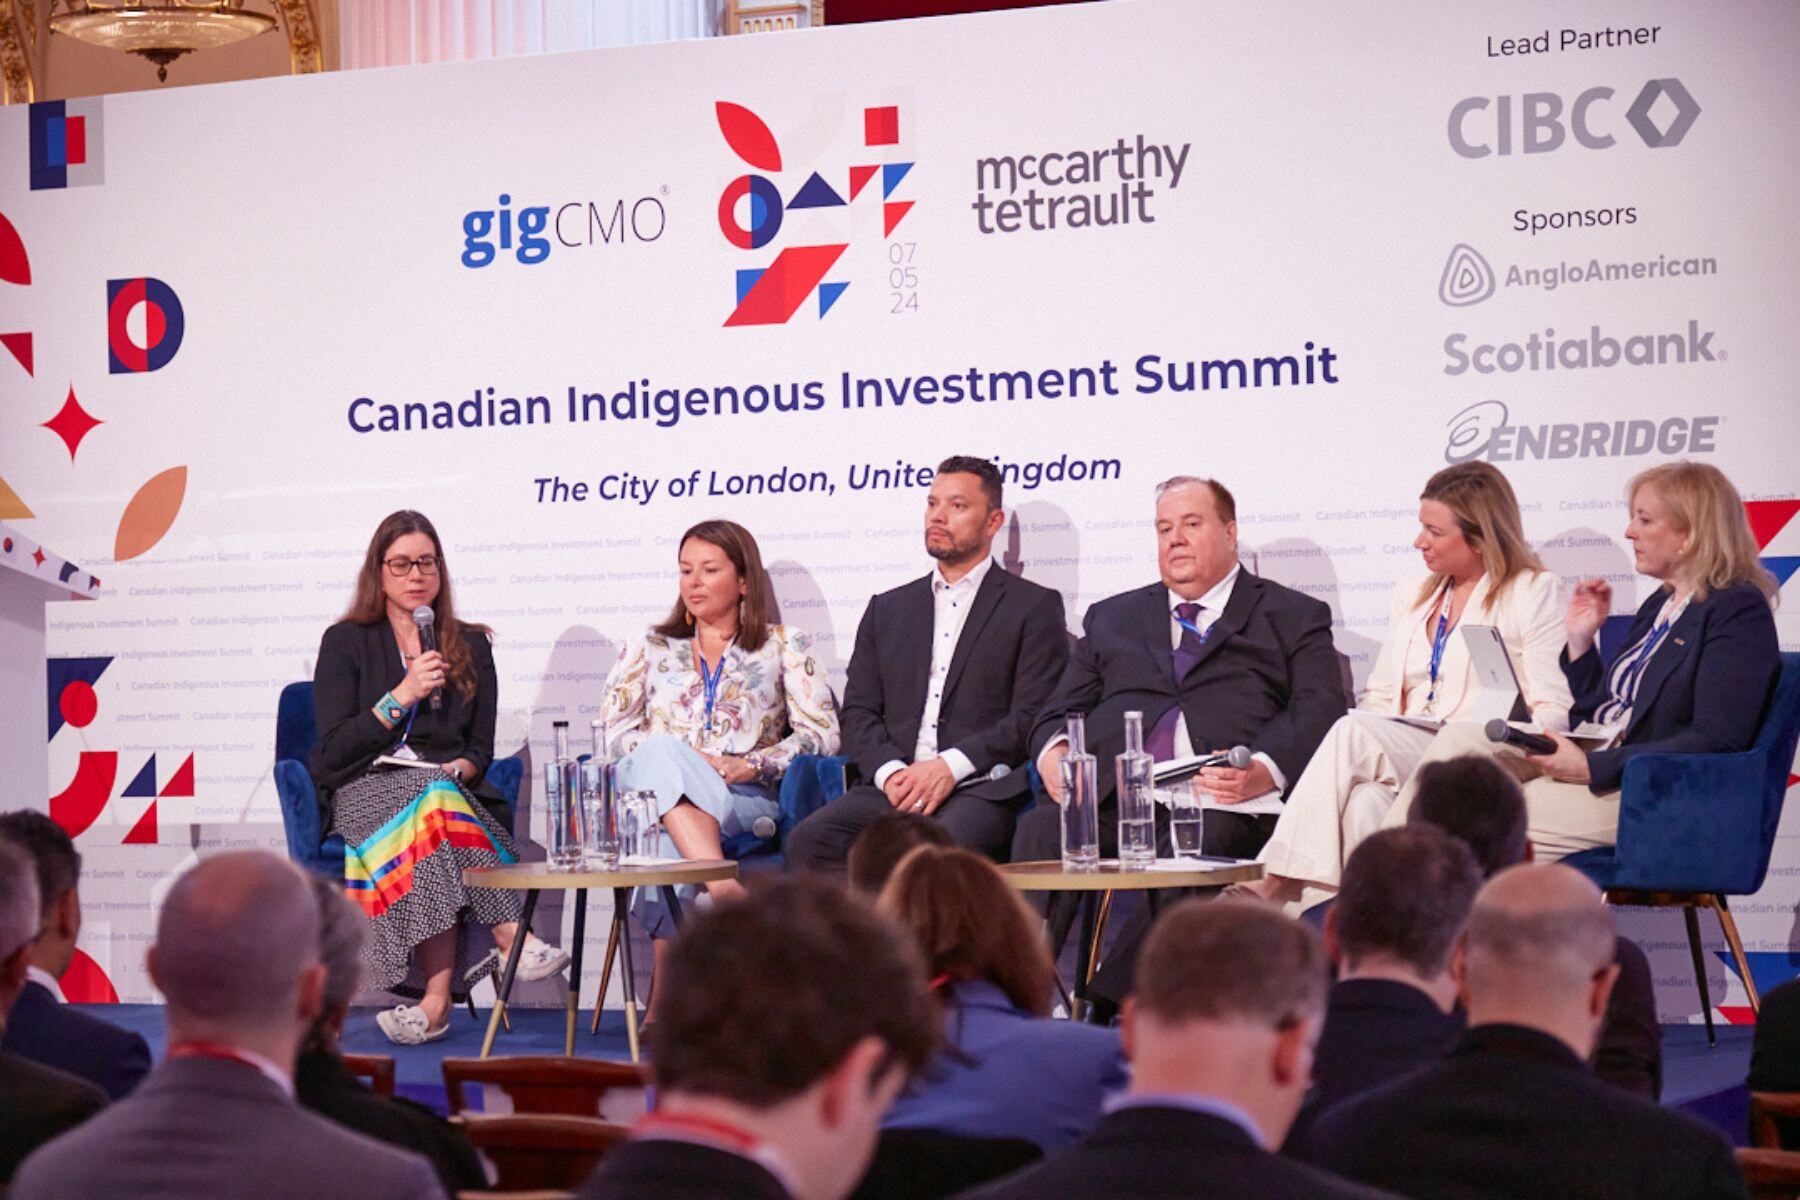 Inaugural Canadian Indigenous Investment Summit held in Mansion House, City of London